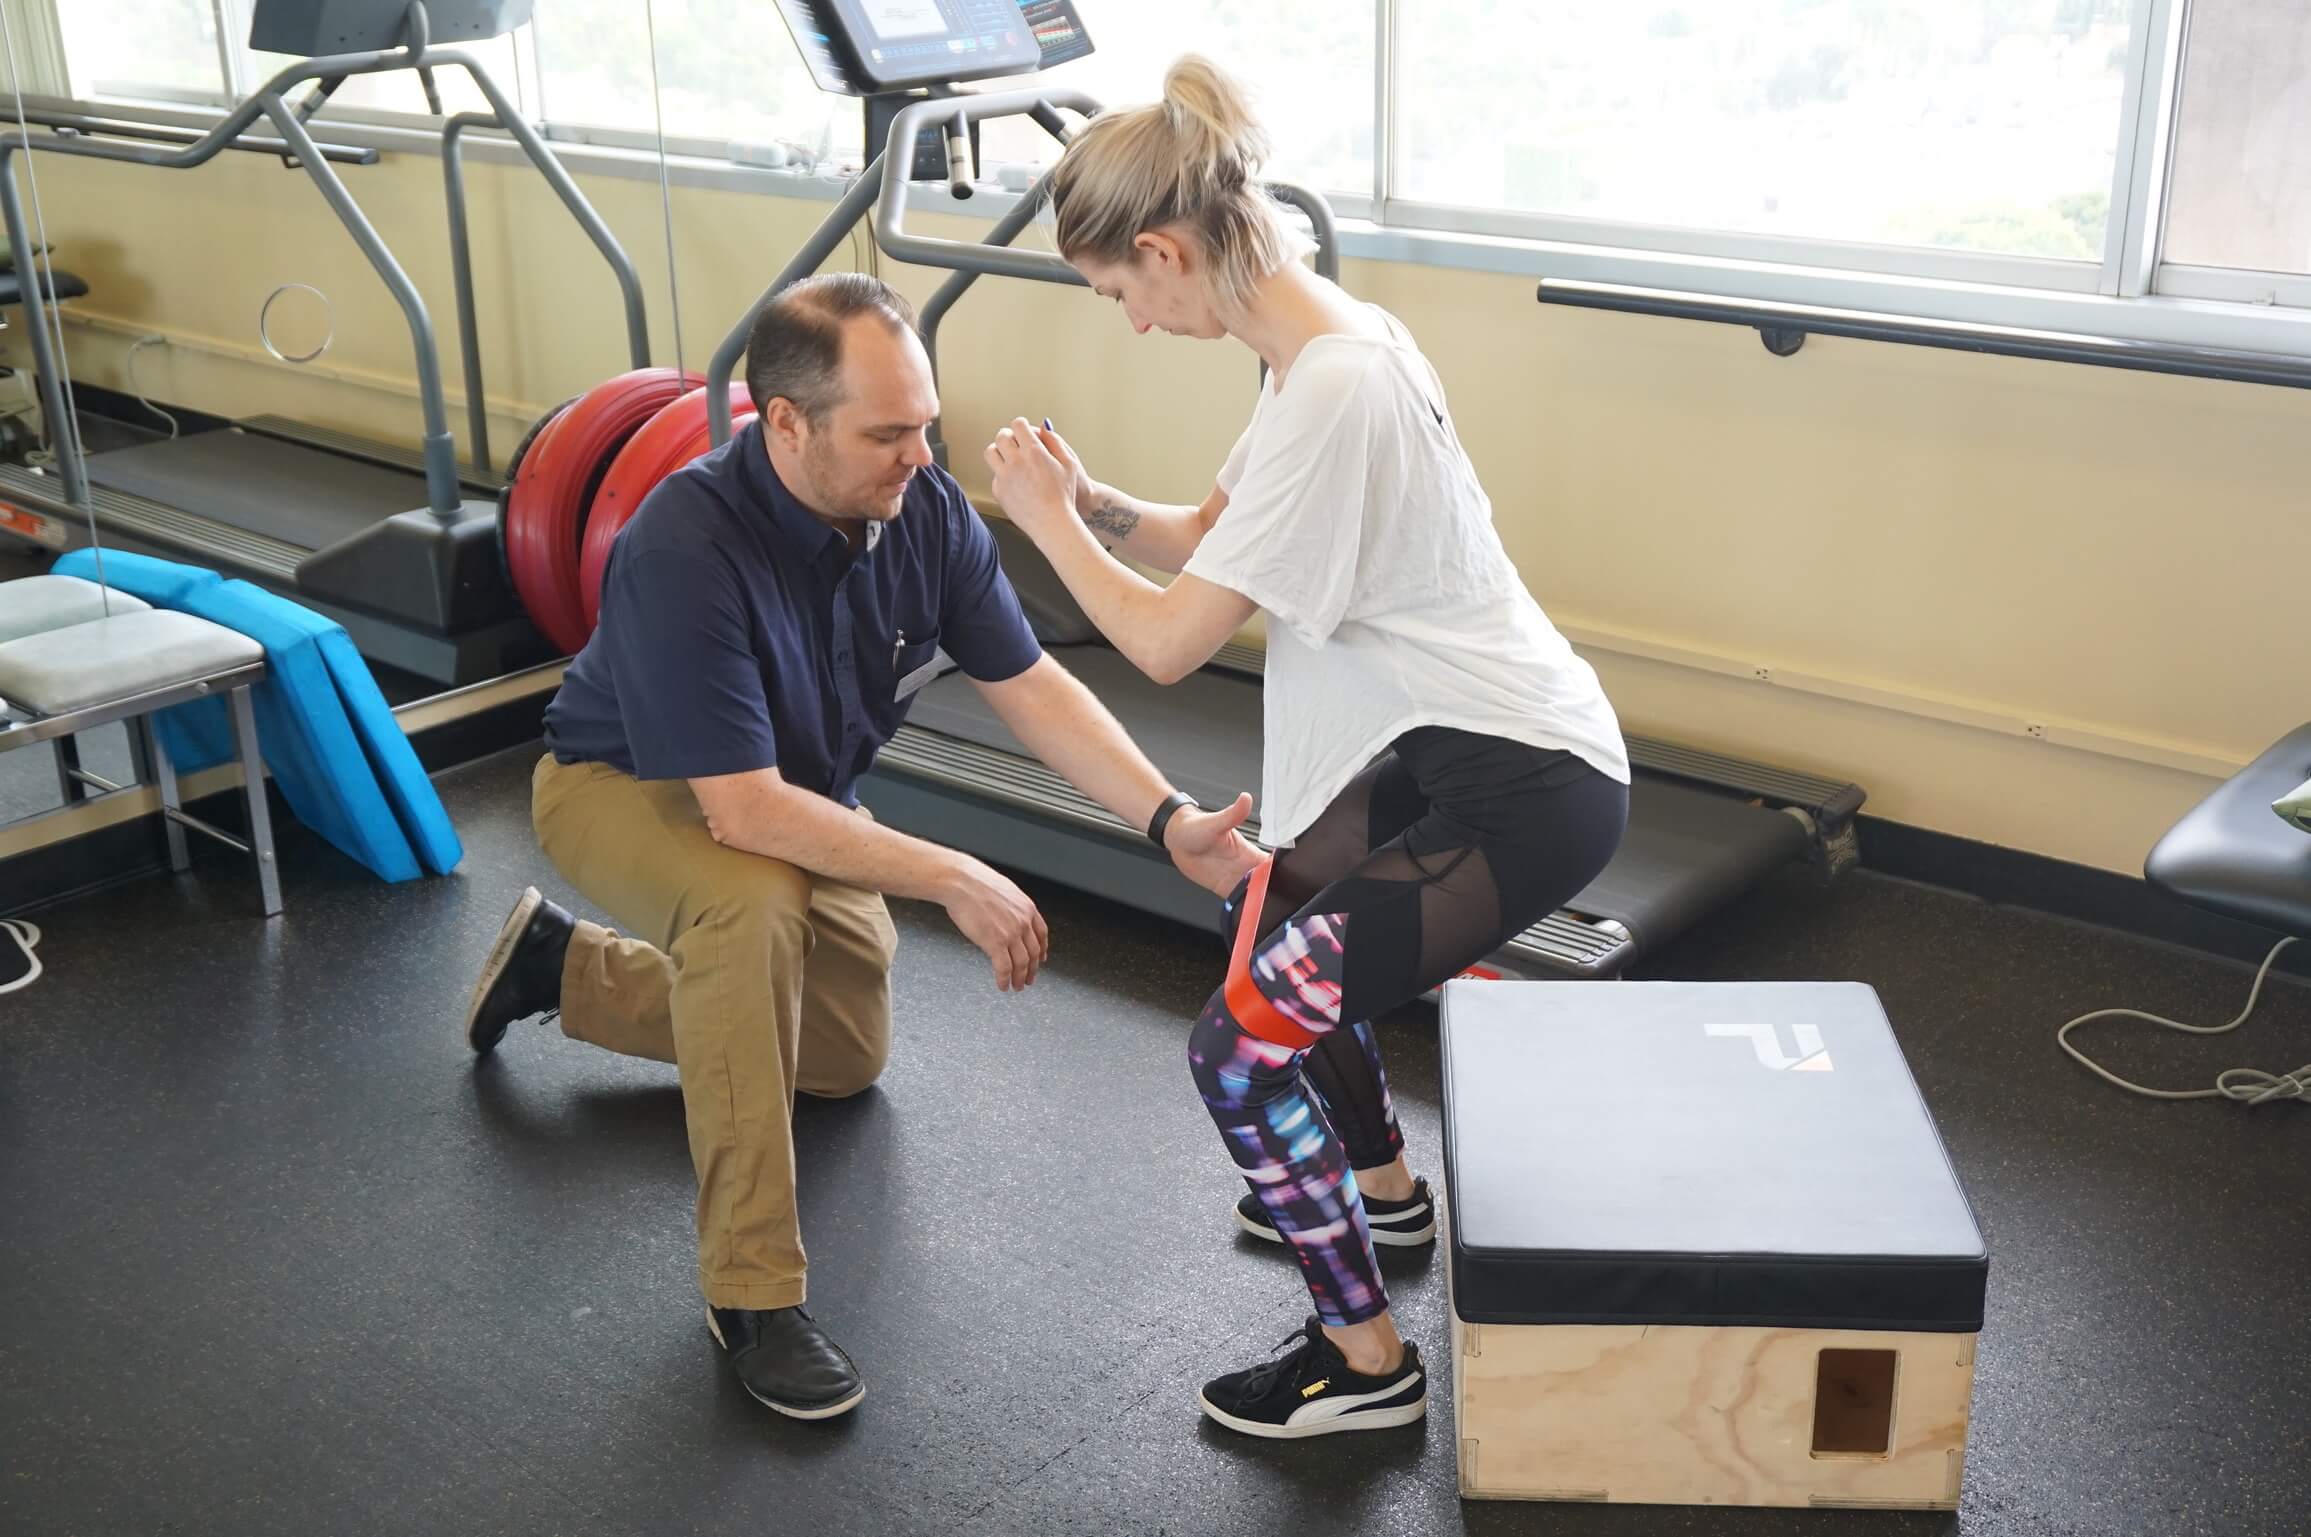 Physical Therapist Jobs in Los Angeles - Larchmont Physical Therapy